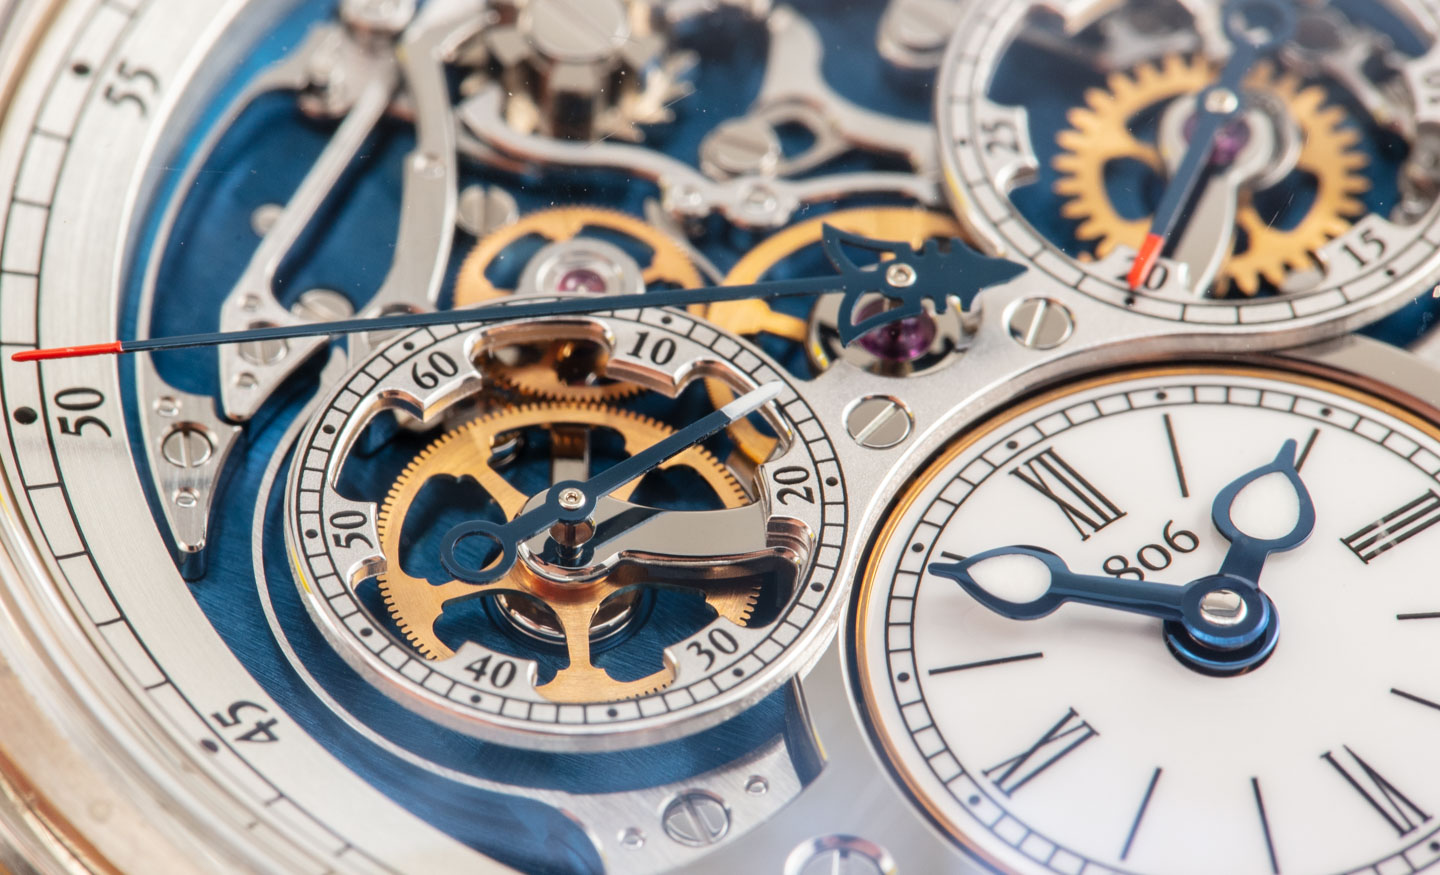 Louis Moinet – The genius behind the world's first chronograph